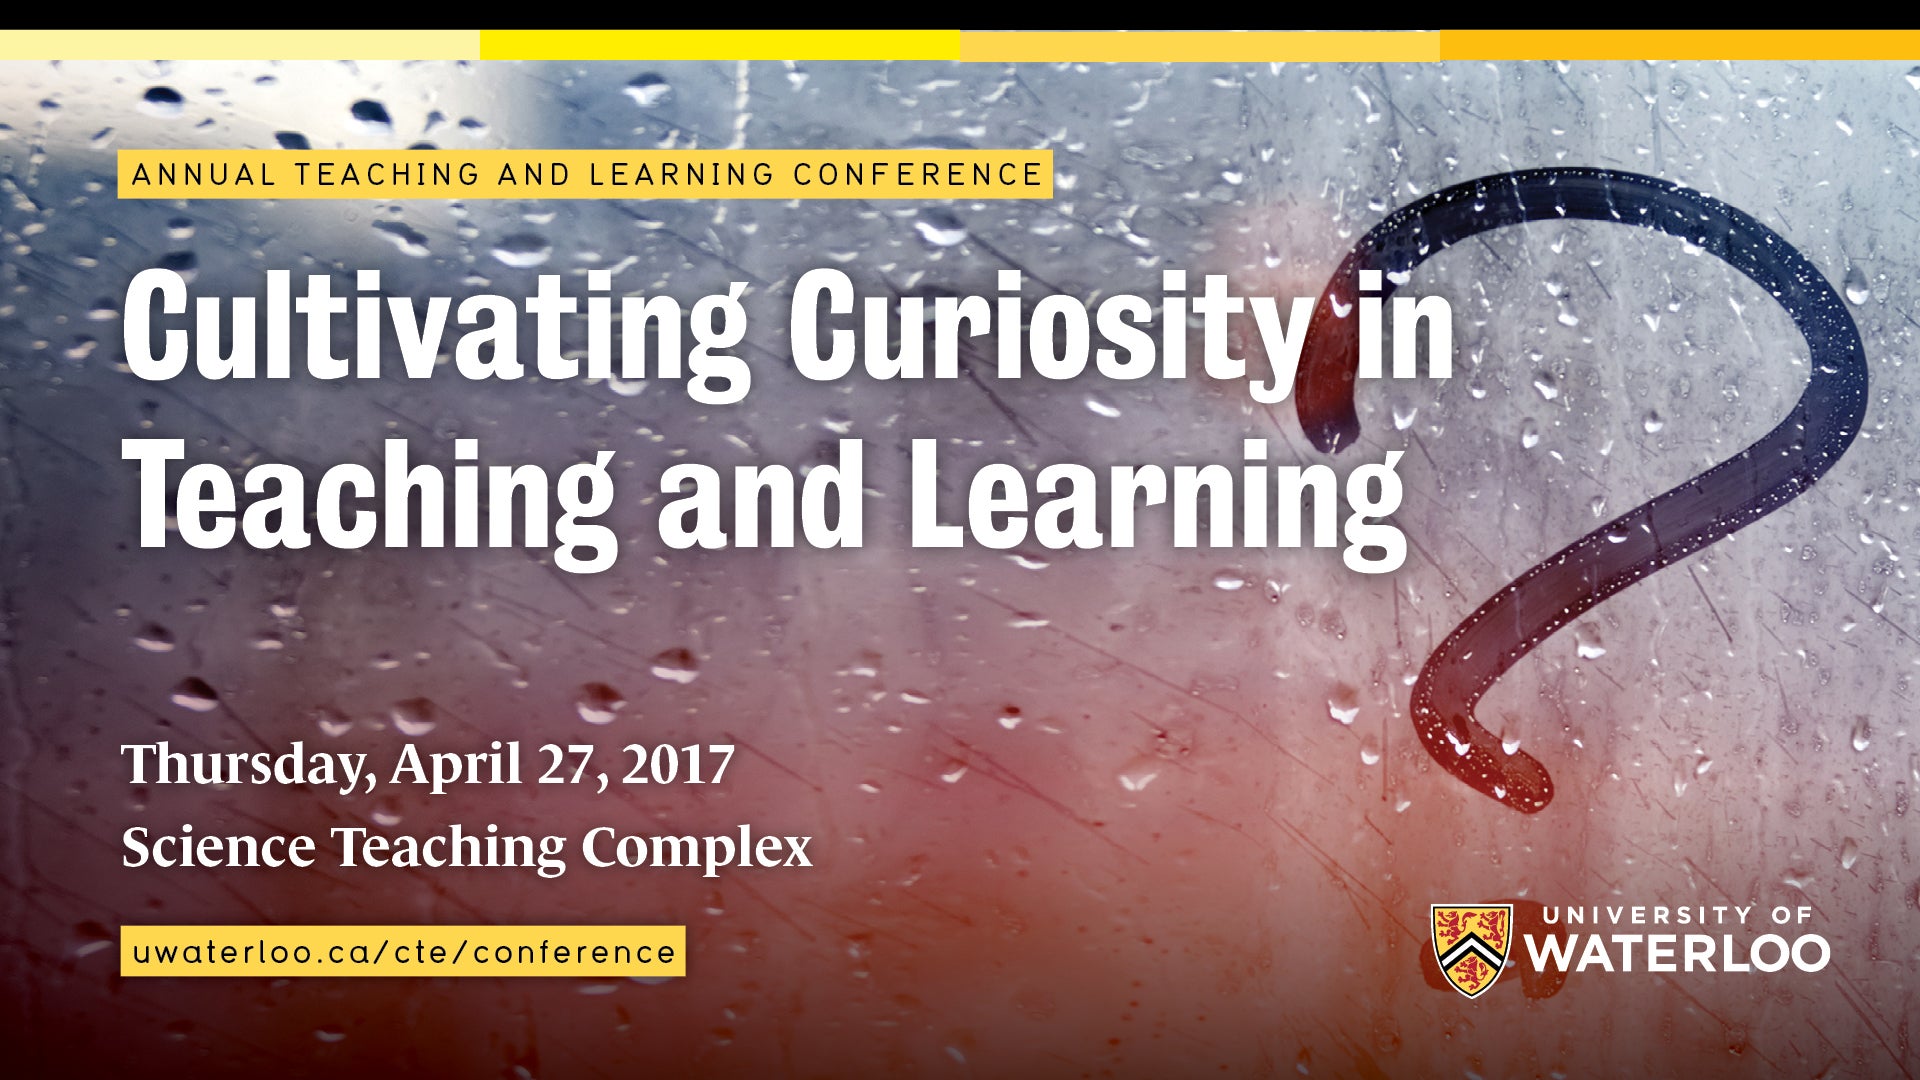 Conference title (Cultivating Curiosity in Teaching and Learning) superimposed over a question mark.